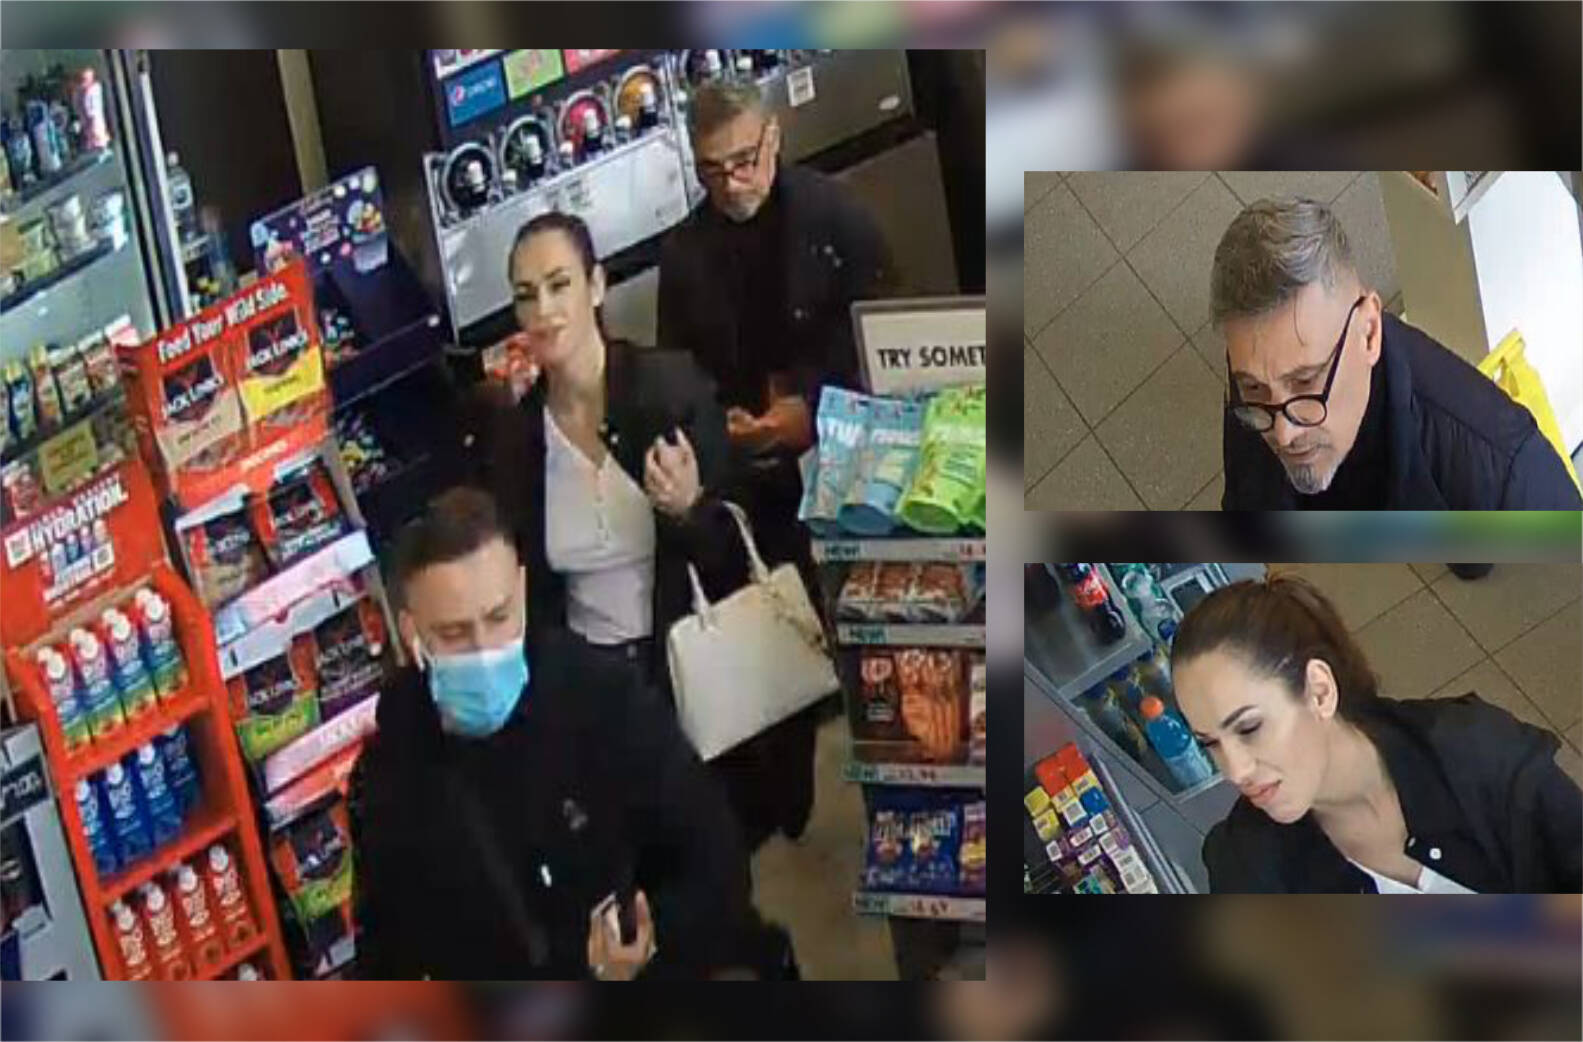 Closed-circuit video from inside an Eagle Landing-area business shows three suspects involved in an alleged theft that happened May 19.